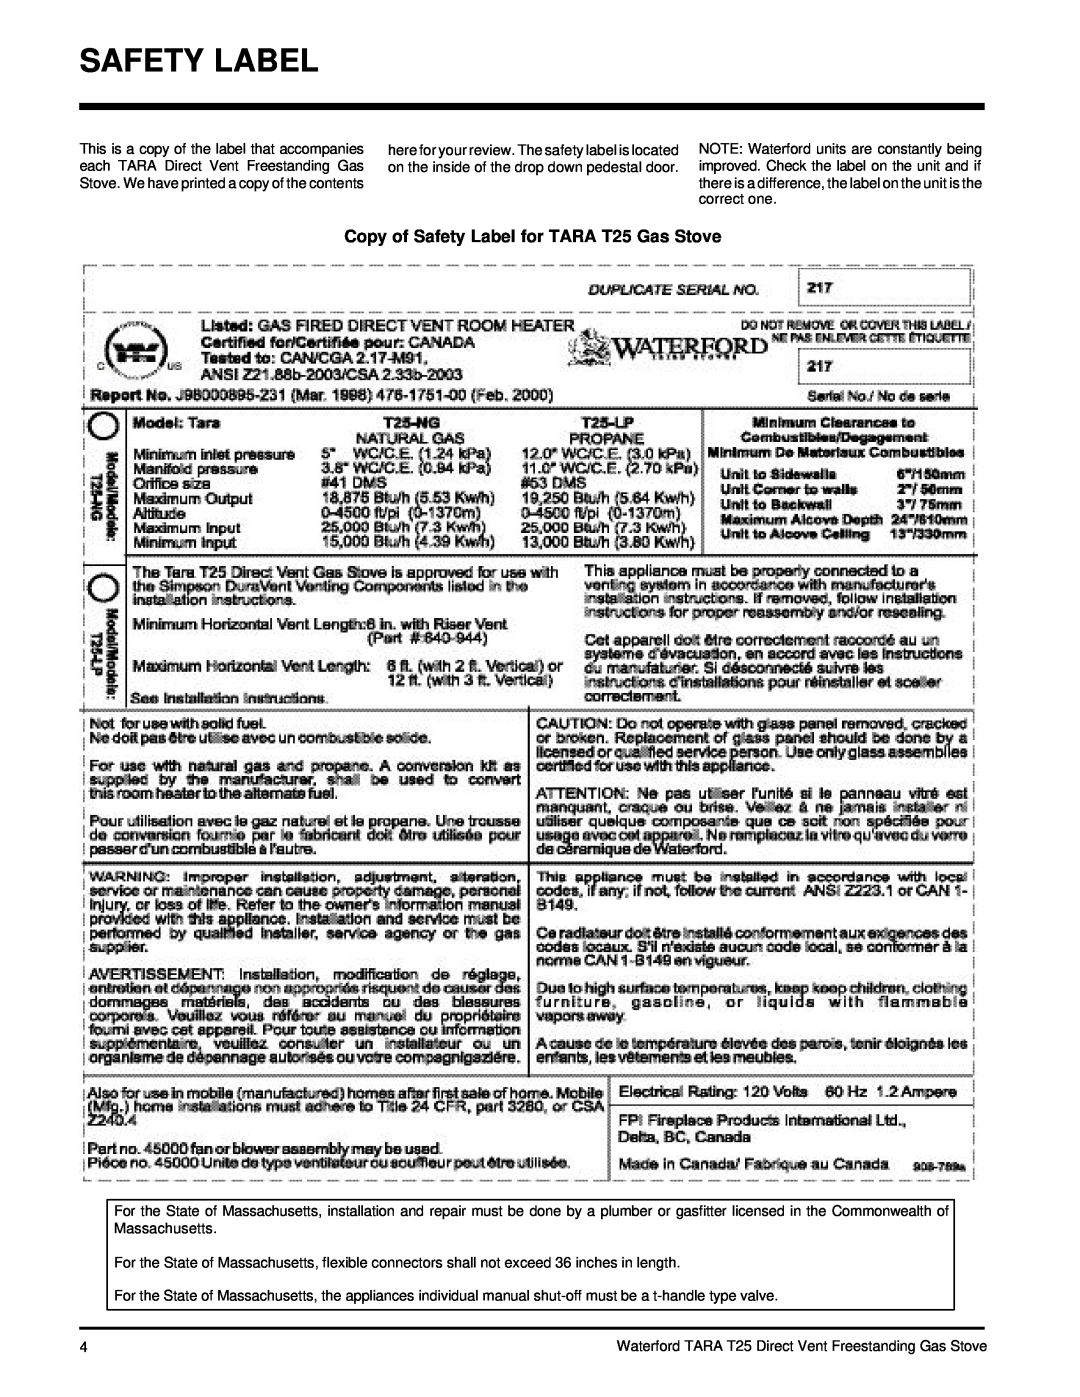 Waterford Appliances T25-NG, T25-LP installation manual Copy of Safety Label for TARA T25 Gas Stove 